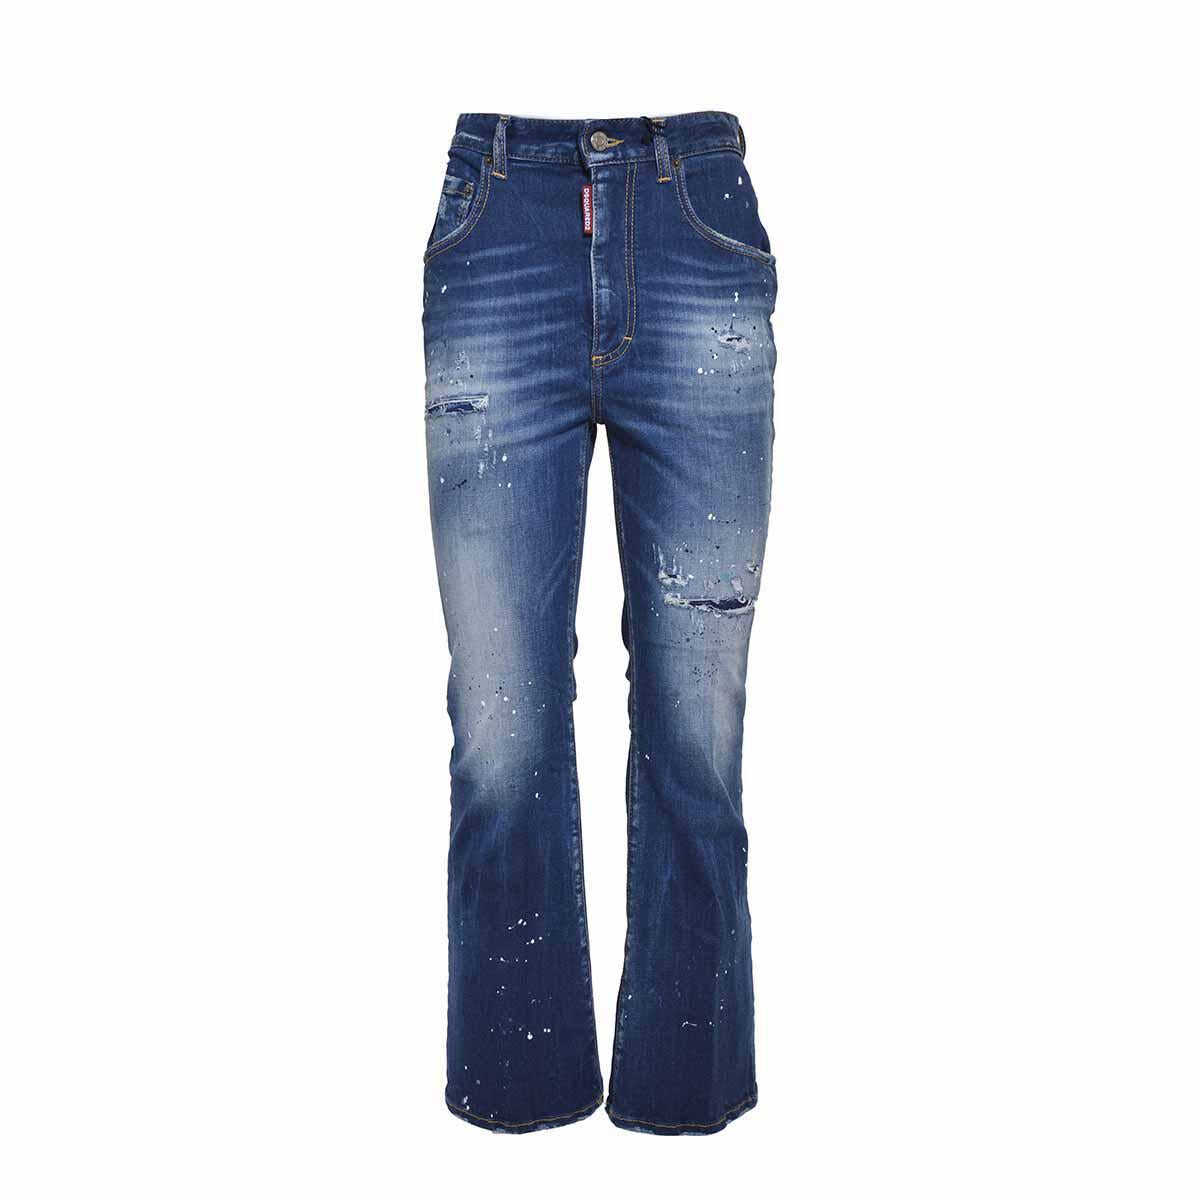 DSQUARED2 DSQUARED2 Blue high-waisted bell bottom jeans with patent leather details Dsquared2 BLUE